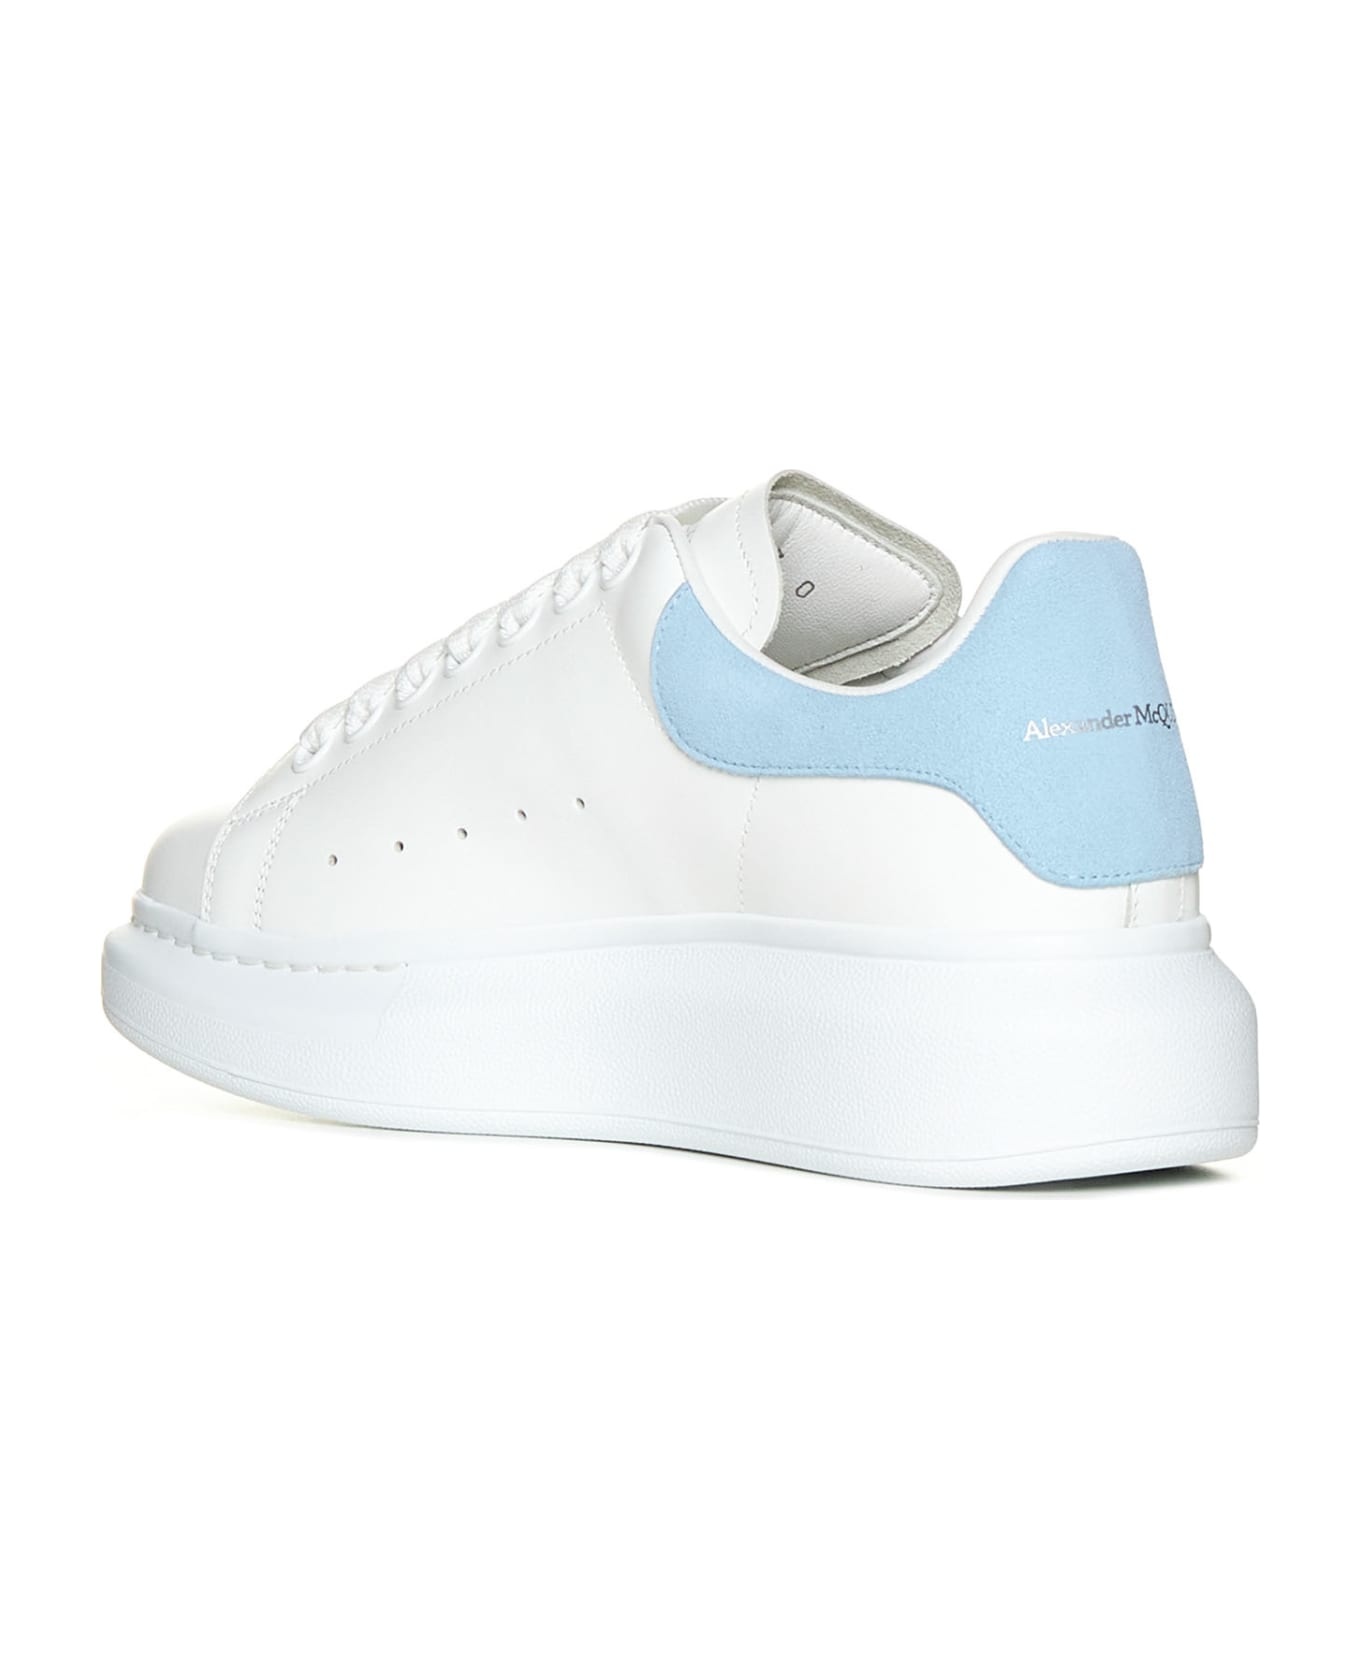 Sneakers In Leather And Light Blue Heel - 3